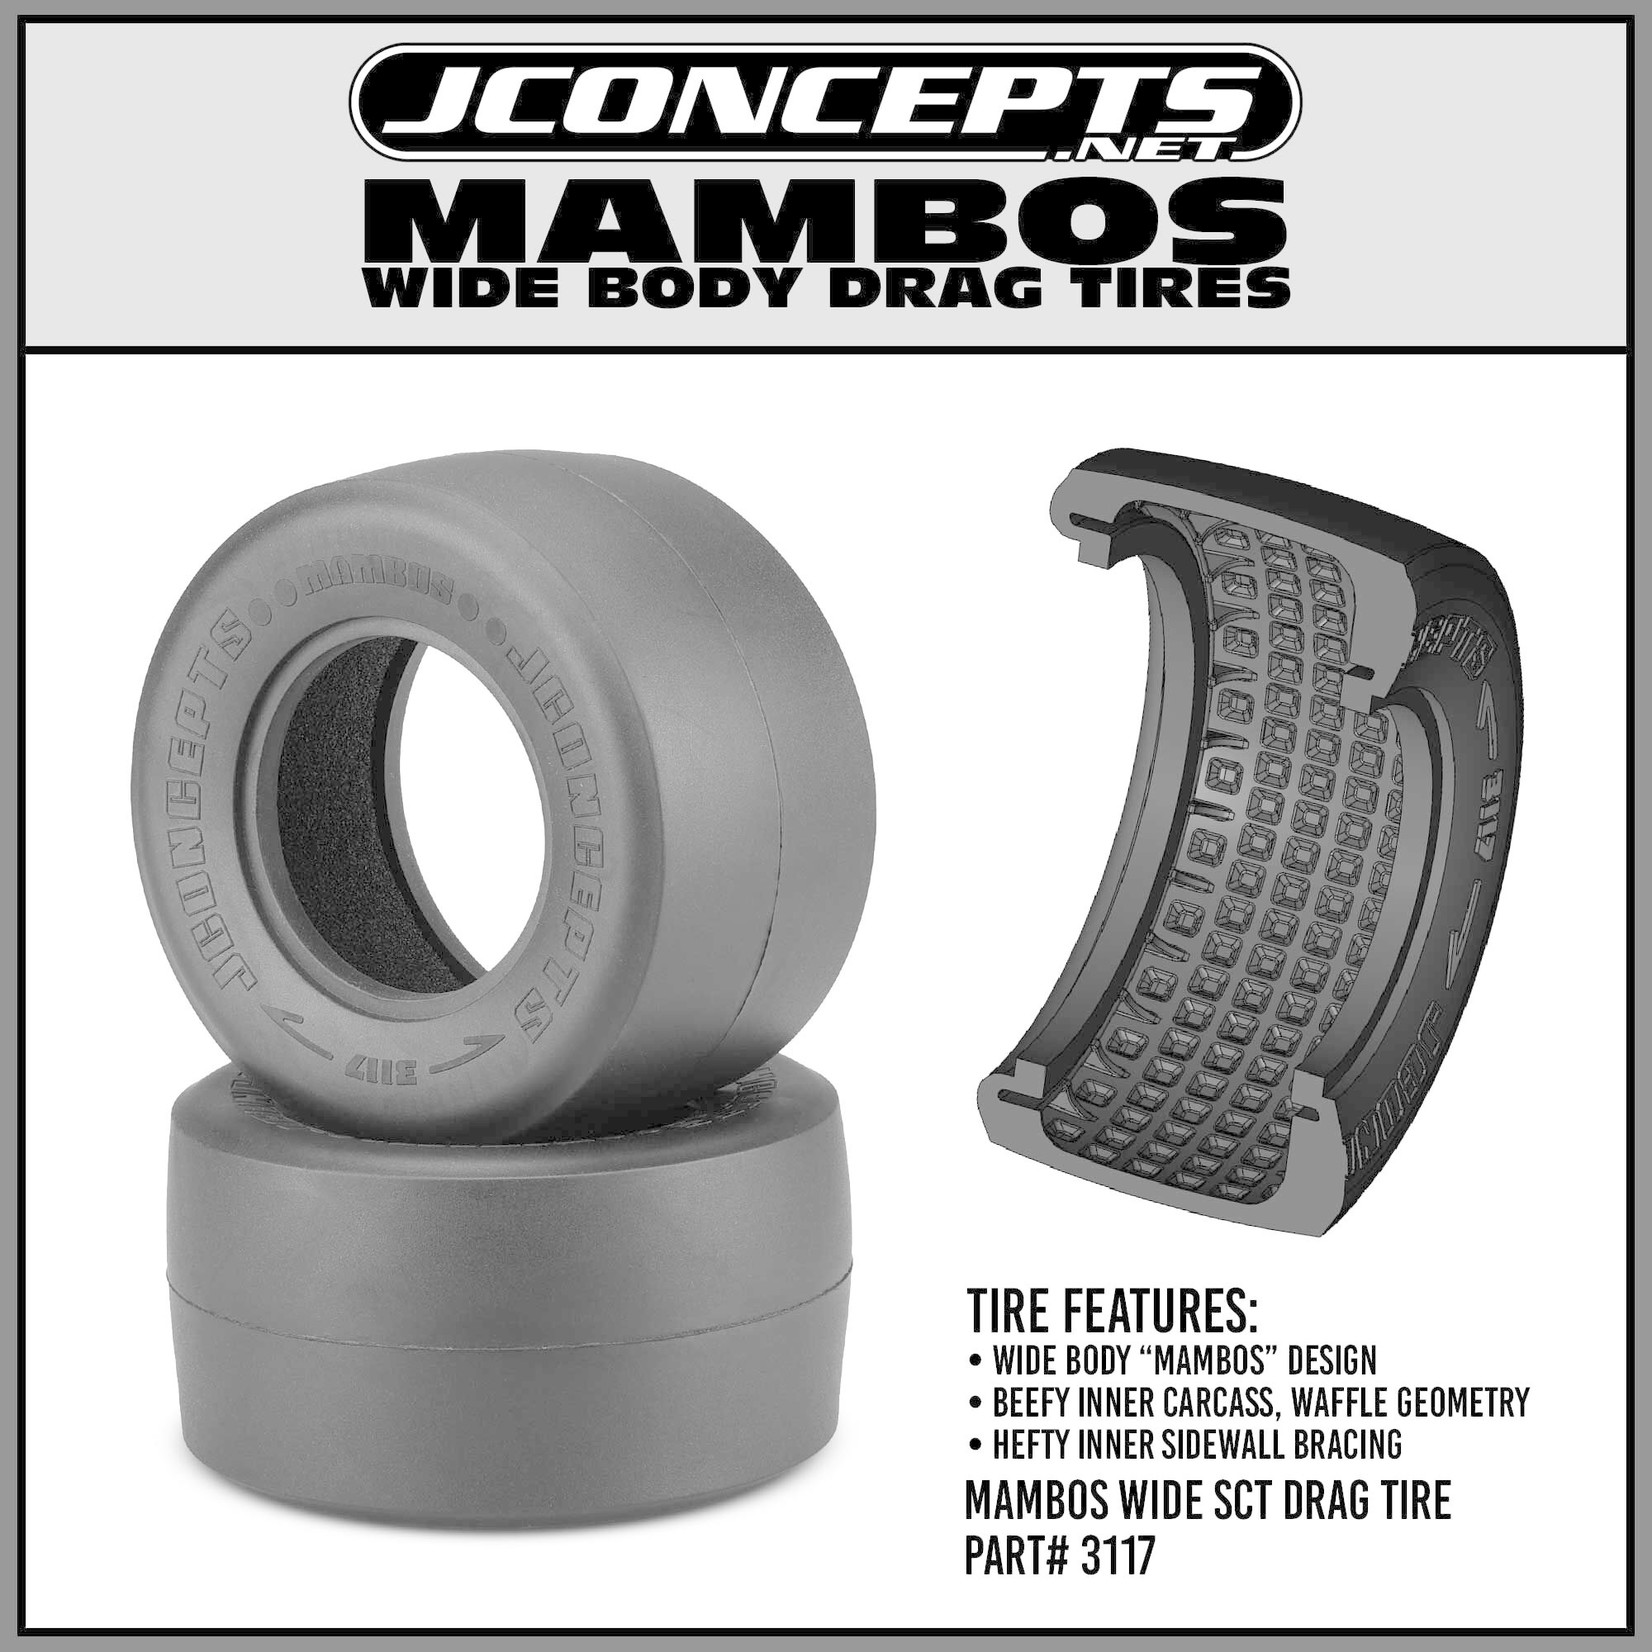 JConcepts Mambos Drag Racing Rear Tires, Green Compound (2)